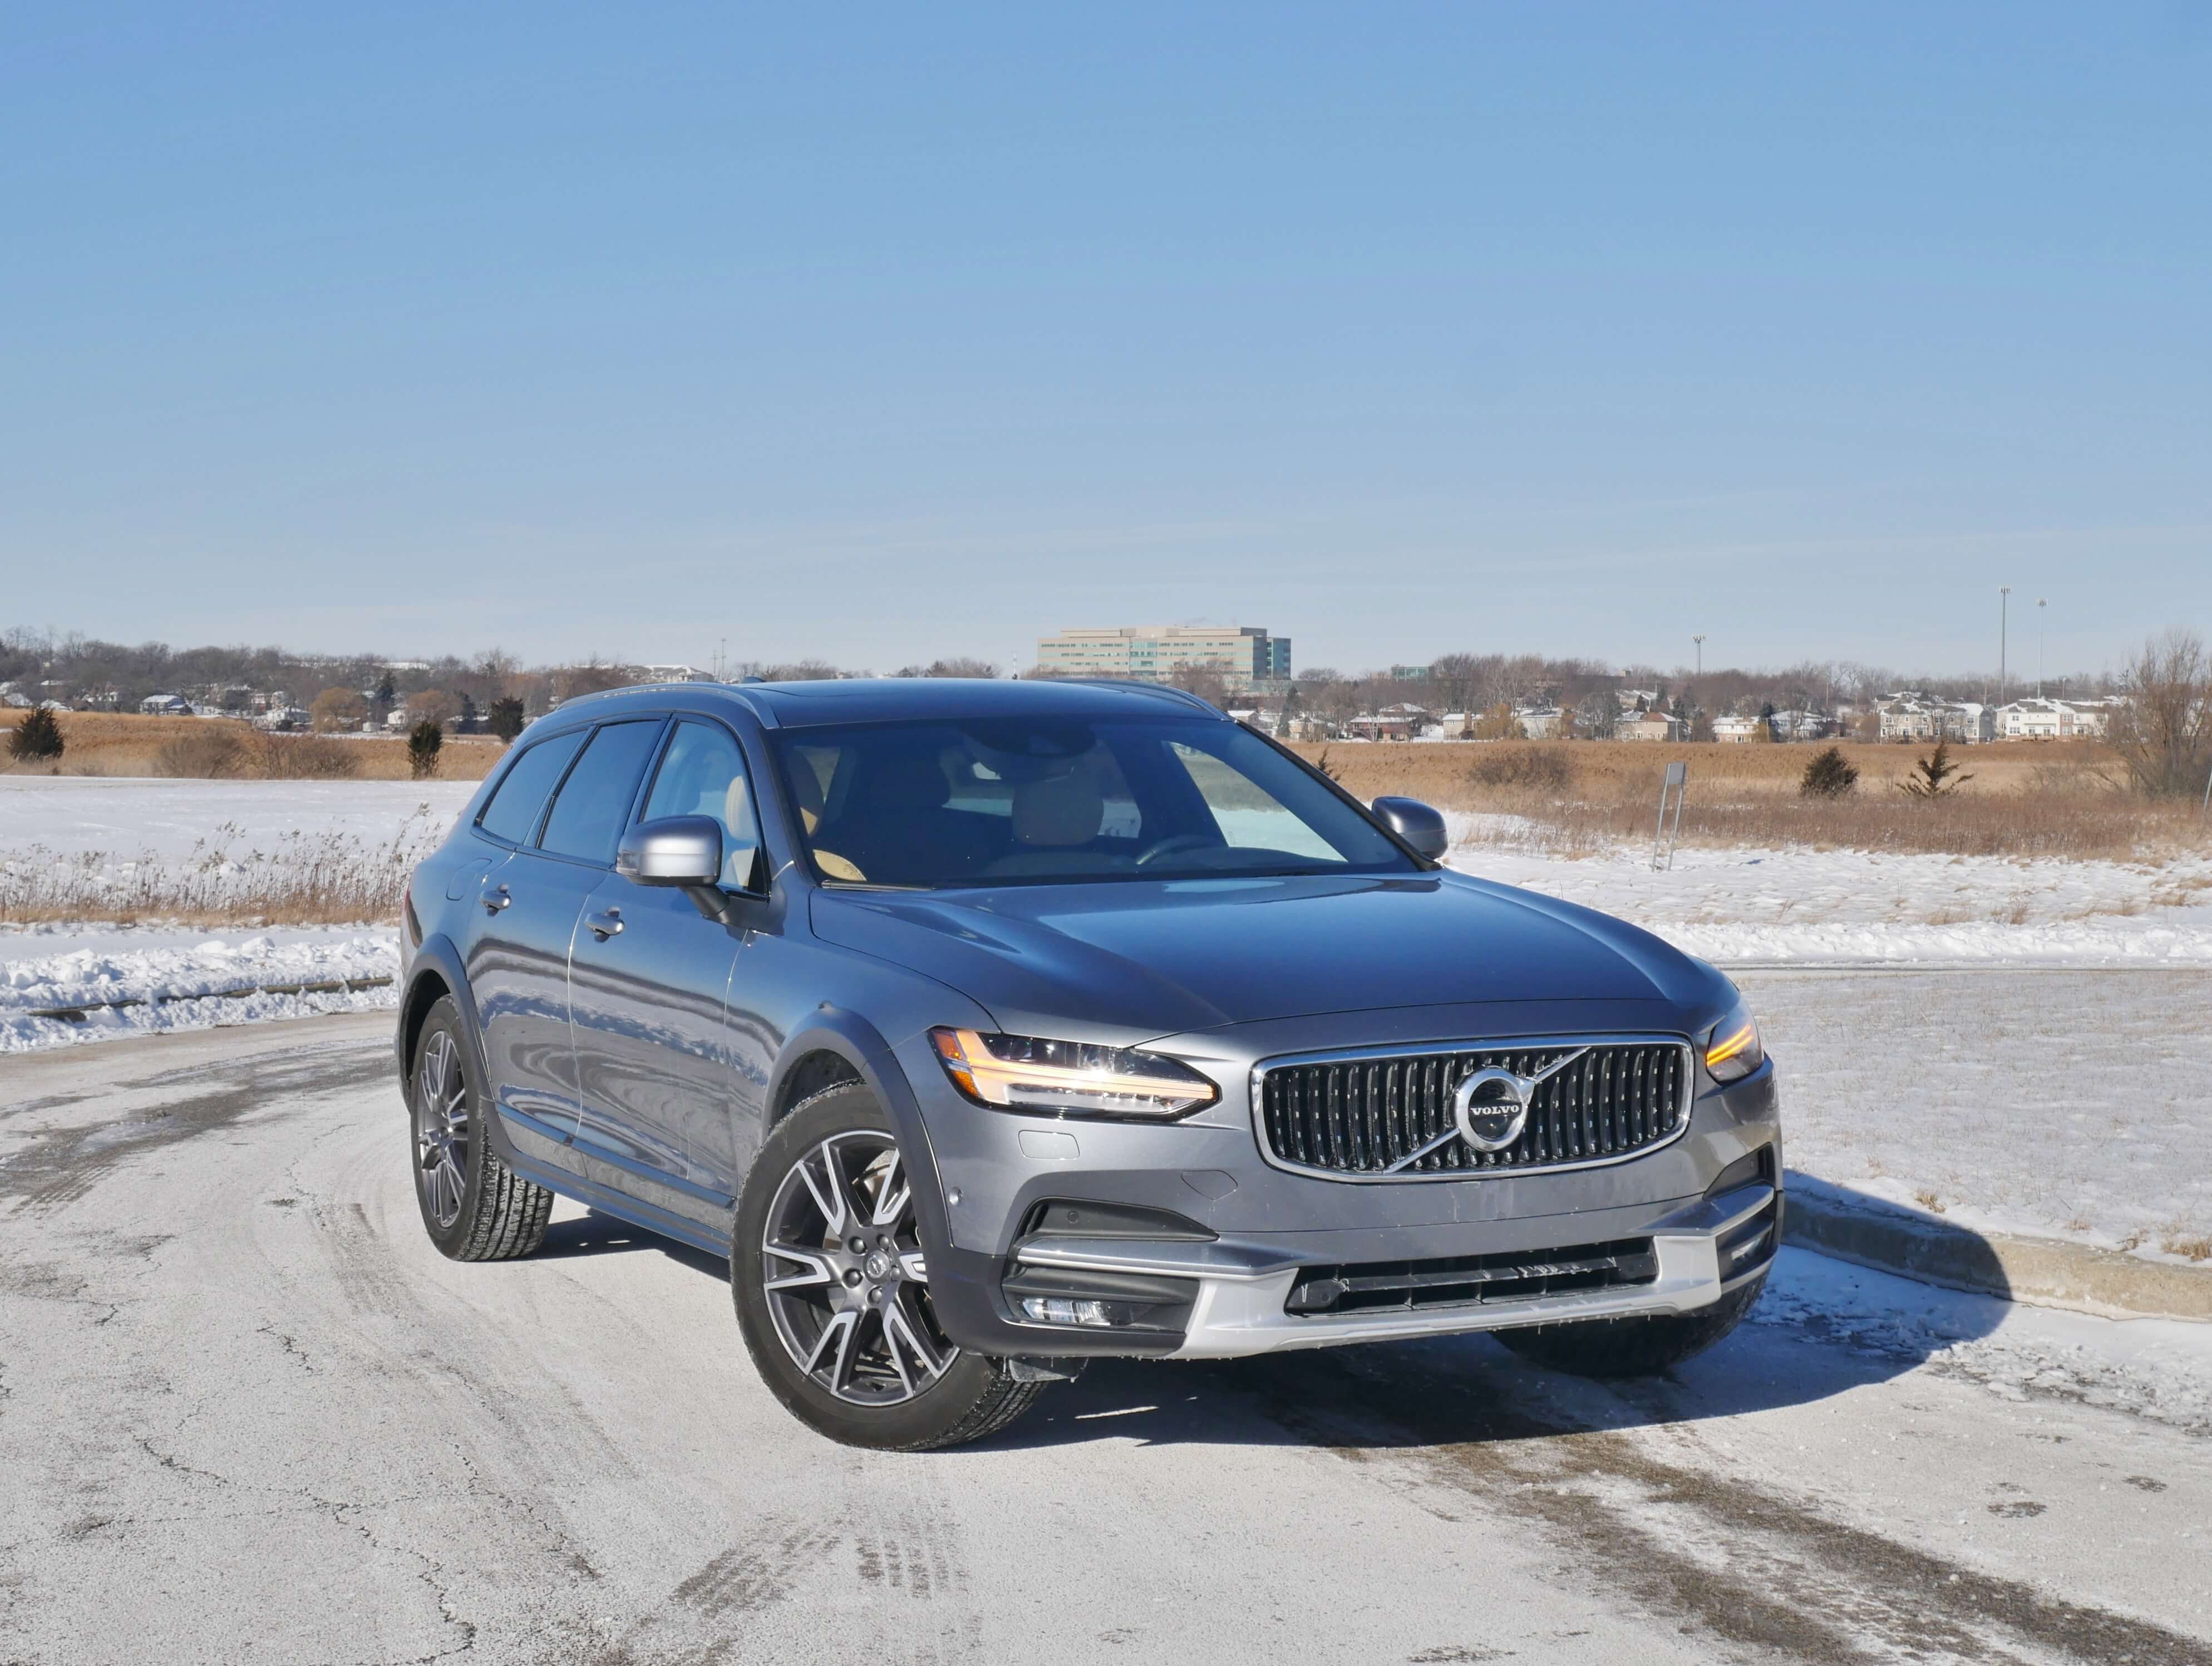 2018 Volvo V90 Cross Country T6: Stares down permafrost